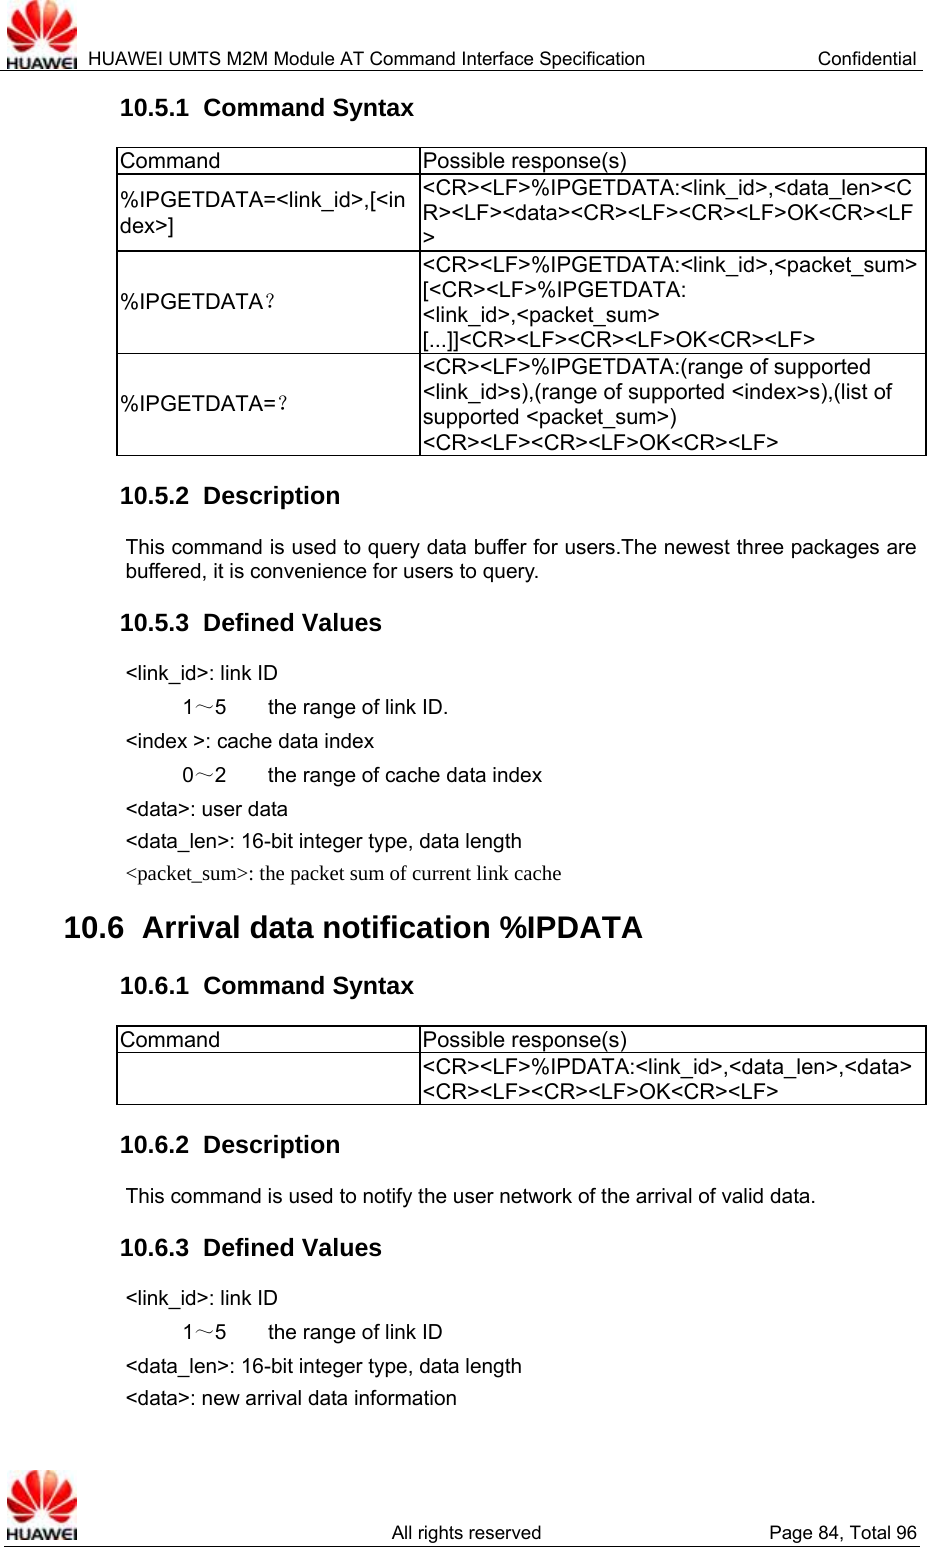  HUAWEI UMTS M2M Module AT Command Interface Specification  Confidential   All rights reserved  Page 84, Total 96 10.5.1  Command Syntax Command Possible response(s) %IPGETDATA=&lt;link_id&gt;,[&lt;index&gt;] &lt;CR&gt;&lt;LF&gt;%IPGETDATA:&lt;link_id&gt;,&lt;data_len&gt;&lt;CR&gt;&lt;LF&gt;&lt;data&gt;&lt;CR&gt;&lt;LF&gt;&lt;CR&gt;&lt;LF&gt;OK&lt;CR&gt;&lt;LF&gt; %IPGETDATA？ &lt;CR&gt;&lt;LF&gt;%IPGETDATA:&lt;link_id&gt;,&lt;packet_sum&gt;[&lt;CR&gt;&lt;LF&gt;%IPGETDATA: &lt;link_id&gt;,&lt;packet_sum&gt; [...]]&lt;CR&gt;&lt;LF&gt;&lt;CR&gt;&lt;LF&gt;OK&lt;CR&gt;&lt;LF&gt; %IPGETDATA=？ &lt;CR&gt;&lt;LF&gt;%IPGETDATA:(range of supported &lt;link_id&gt;s),(range of supported &lt;index&gt;s),(list of supported &lt;packet_sum&gt;) &lt;CR&gt;&lt;LF&gt;&lt;CR&gt;&lt;LF&gt;OK&lt;CR&gt;&lt;LF&gt; 10.5.2  Description This command is used to query data buffer for users.The newest three packages are buffered, it is convenience for users to query.   10.5.3  Defined Values &lt;link_id&gt;: link ID 1～5    the range of link ID. &lt;index &gt;: cache data index 0～2        the range of cache data index &lt;data&gt;: user data &lt;data_len&gt;: 16-bit integer type, data length &lt;packet_sum&gt;: the packet sum of current link cache 10.6  Arrival data notification %IPDATA 10.6.1  Command Syntax Command Possible response(s)  &lt;CR&gt;&lt;LF&gt;%IPDATA:&lt;link_id&gt;,&lt;data_len&gt;,&lt;data&gt;&lt;CR&gt;&lt;LF&gt;&lt;CR&gt;&lt;LF&gt;OK&lt;CR&gt;&lt;LF&gt; 10.6.2  Description This command is used to notify the user network of the arrival of valid data. 10.6.3  Defined Values &lt;link_id&gt;: link ID 1～5    the range of link ID &lt;data_len&gt;: 16-bit integer type, data length &lt;data&gt;: new arrival data information 